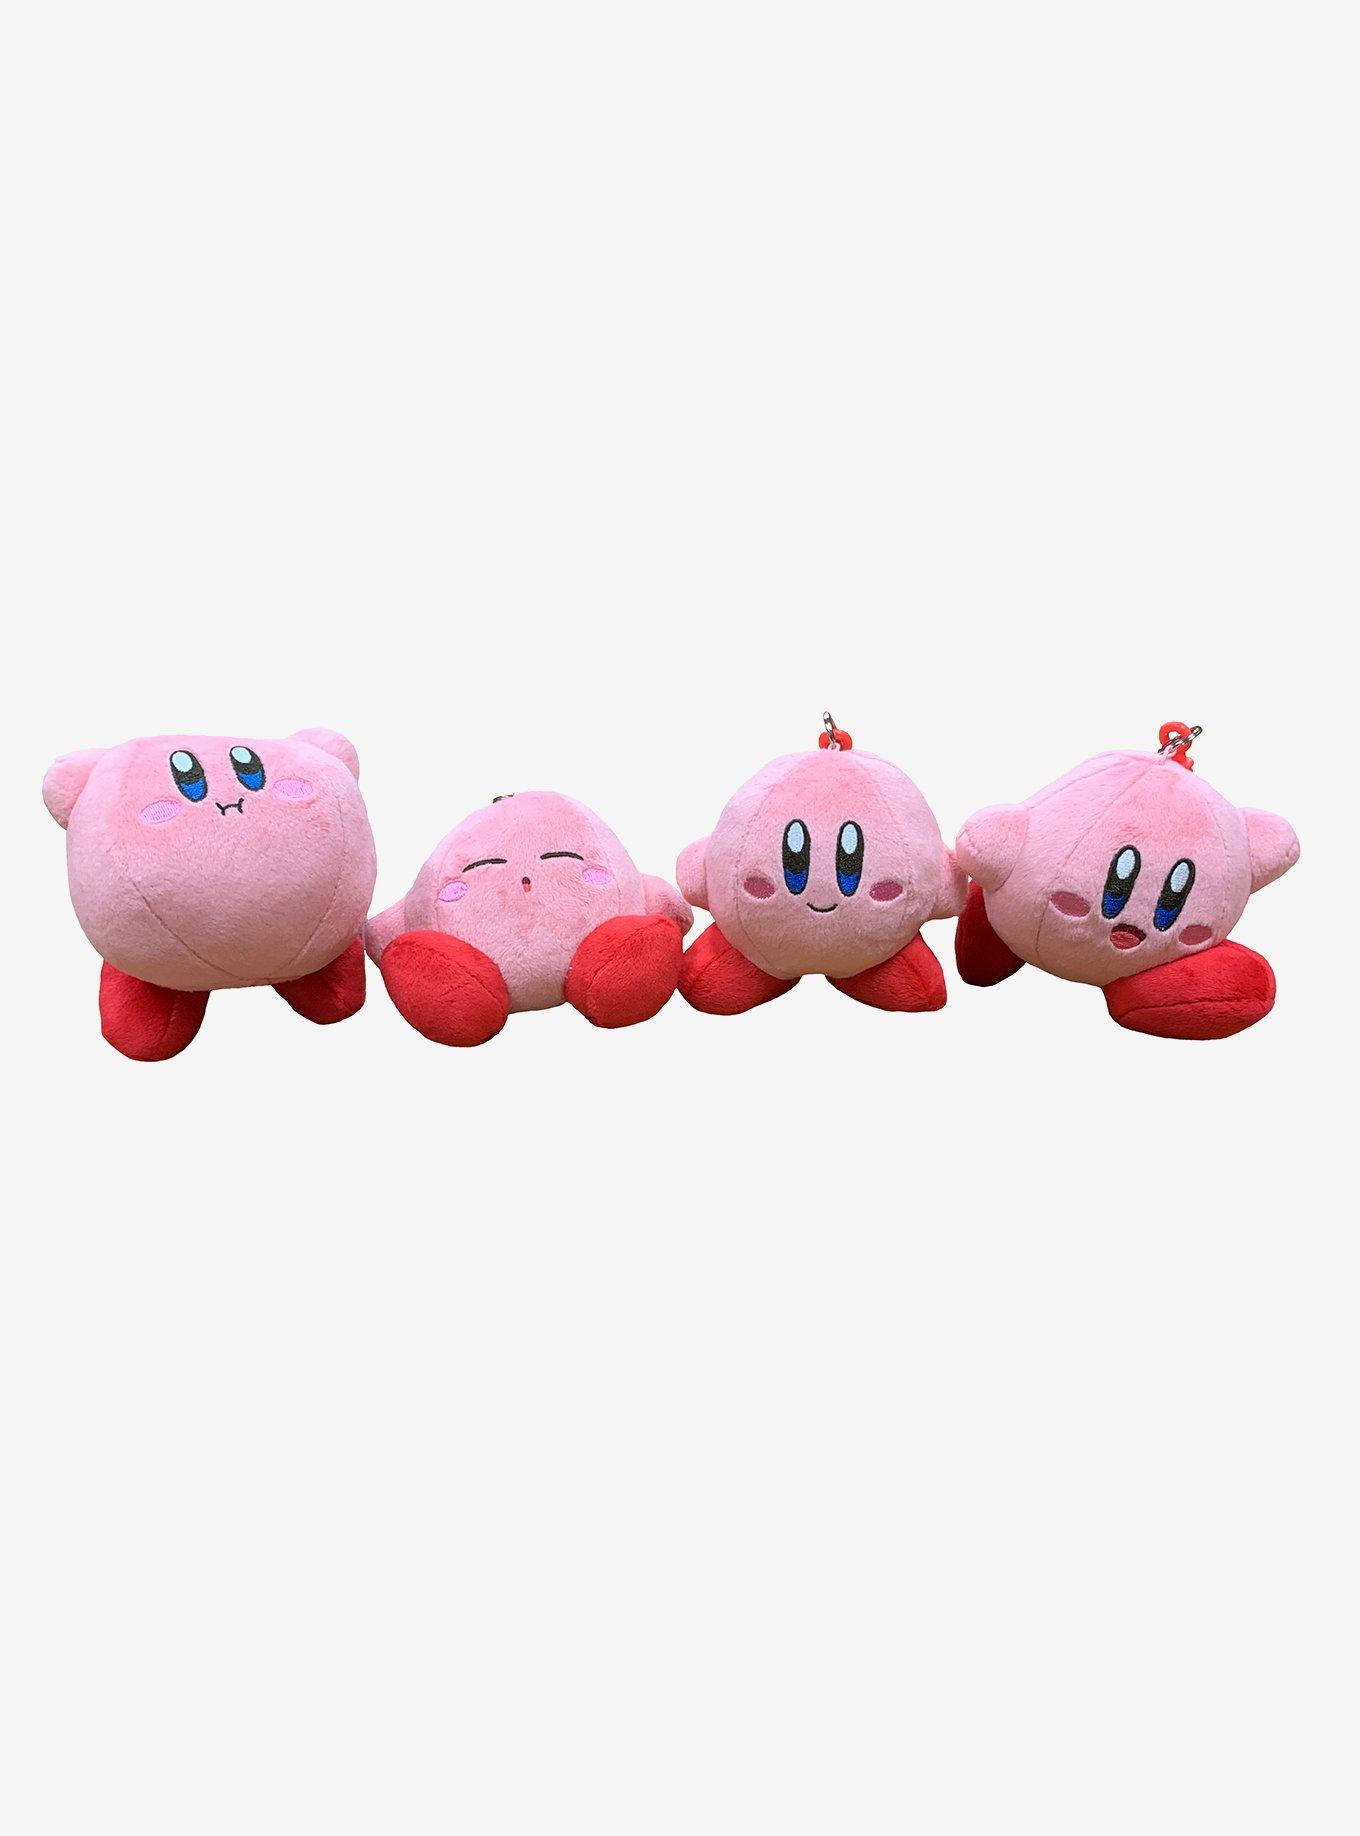 Kirby 10 Plush - Nintendo Official Site